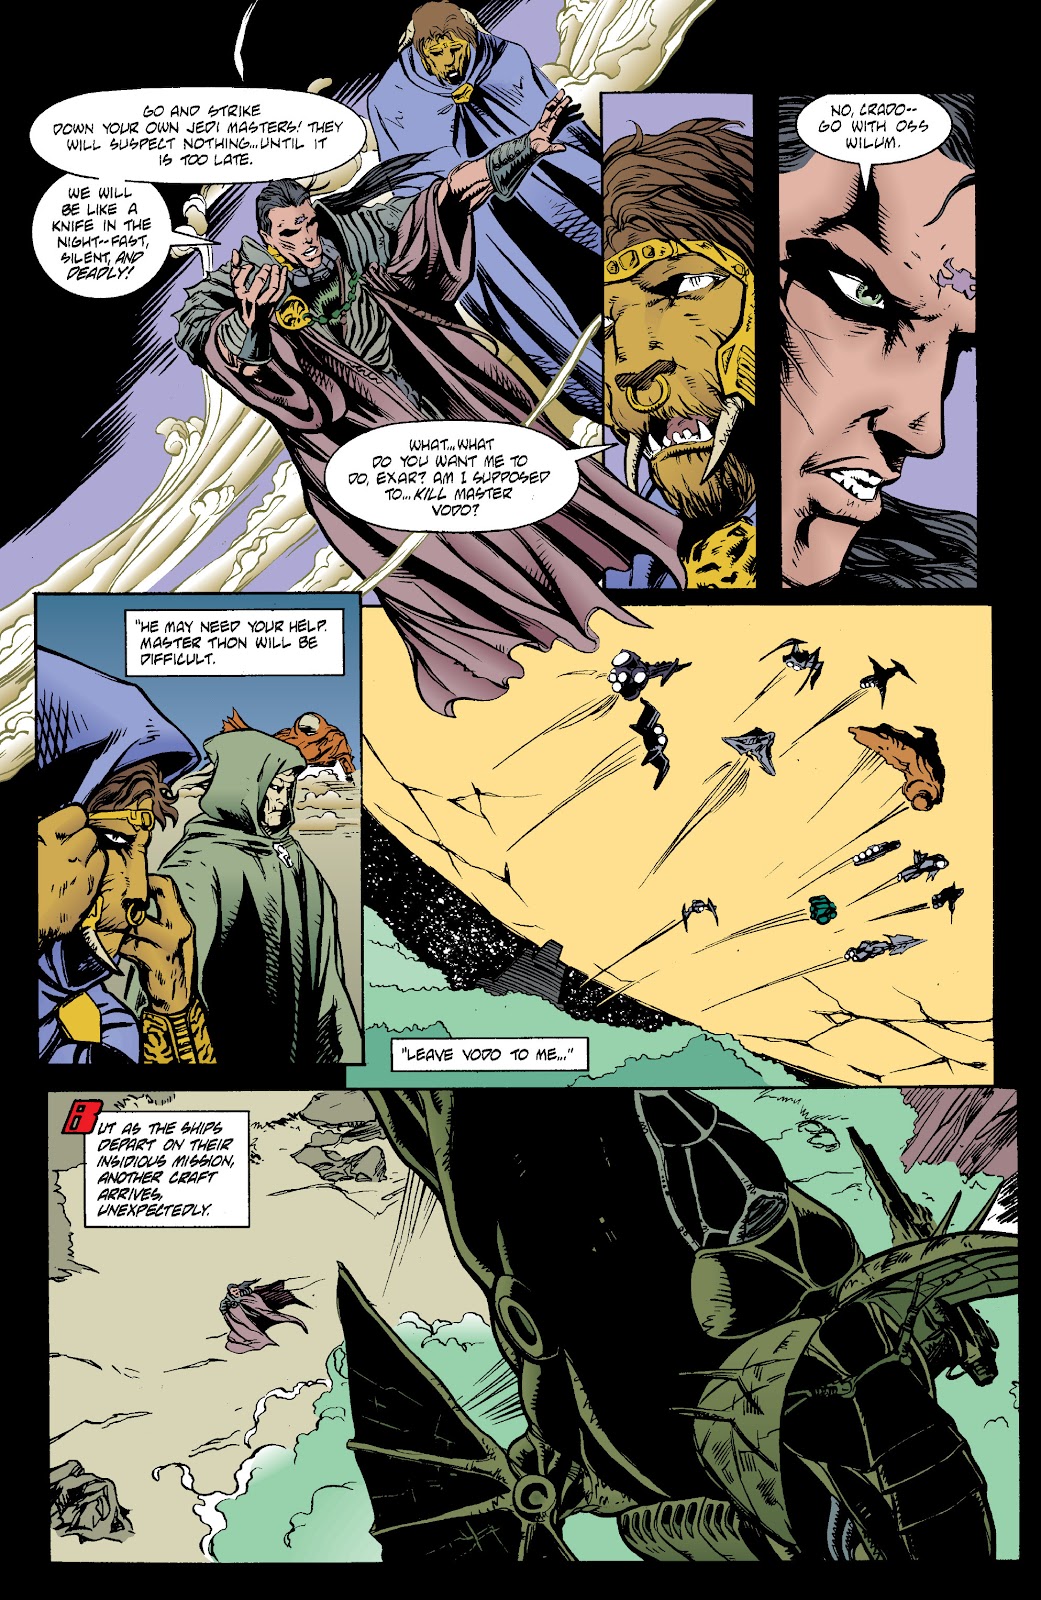 Star Wars: Tales of the Jedi - The Sith War issue 3 - Page 11